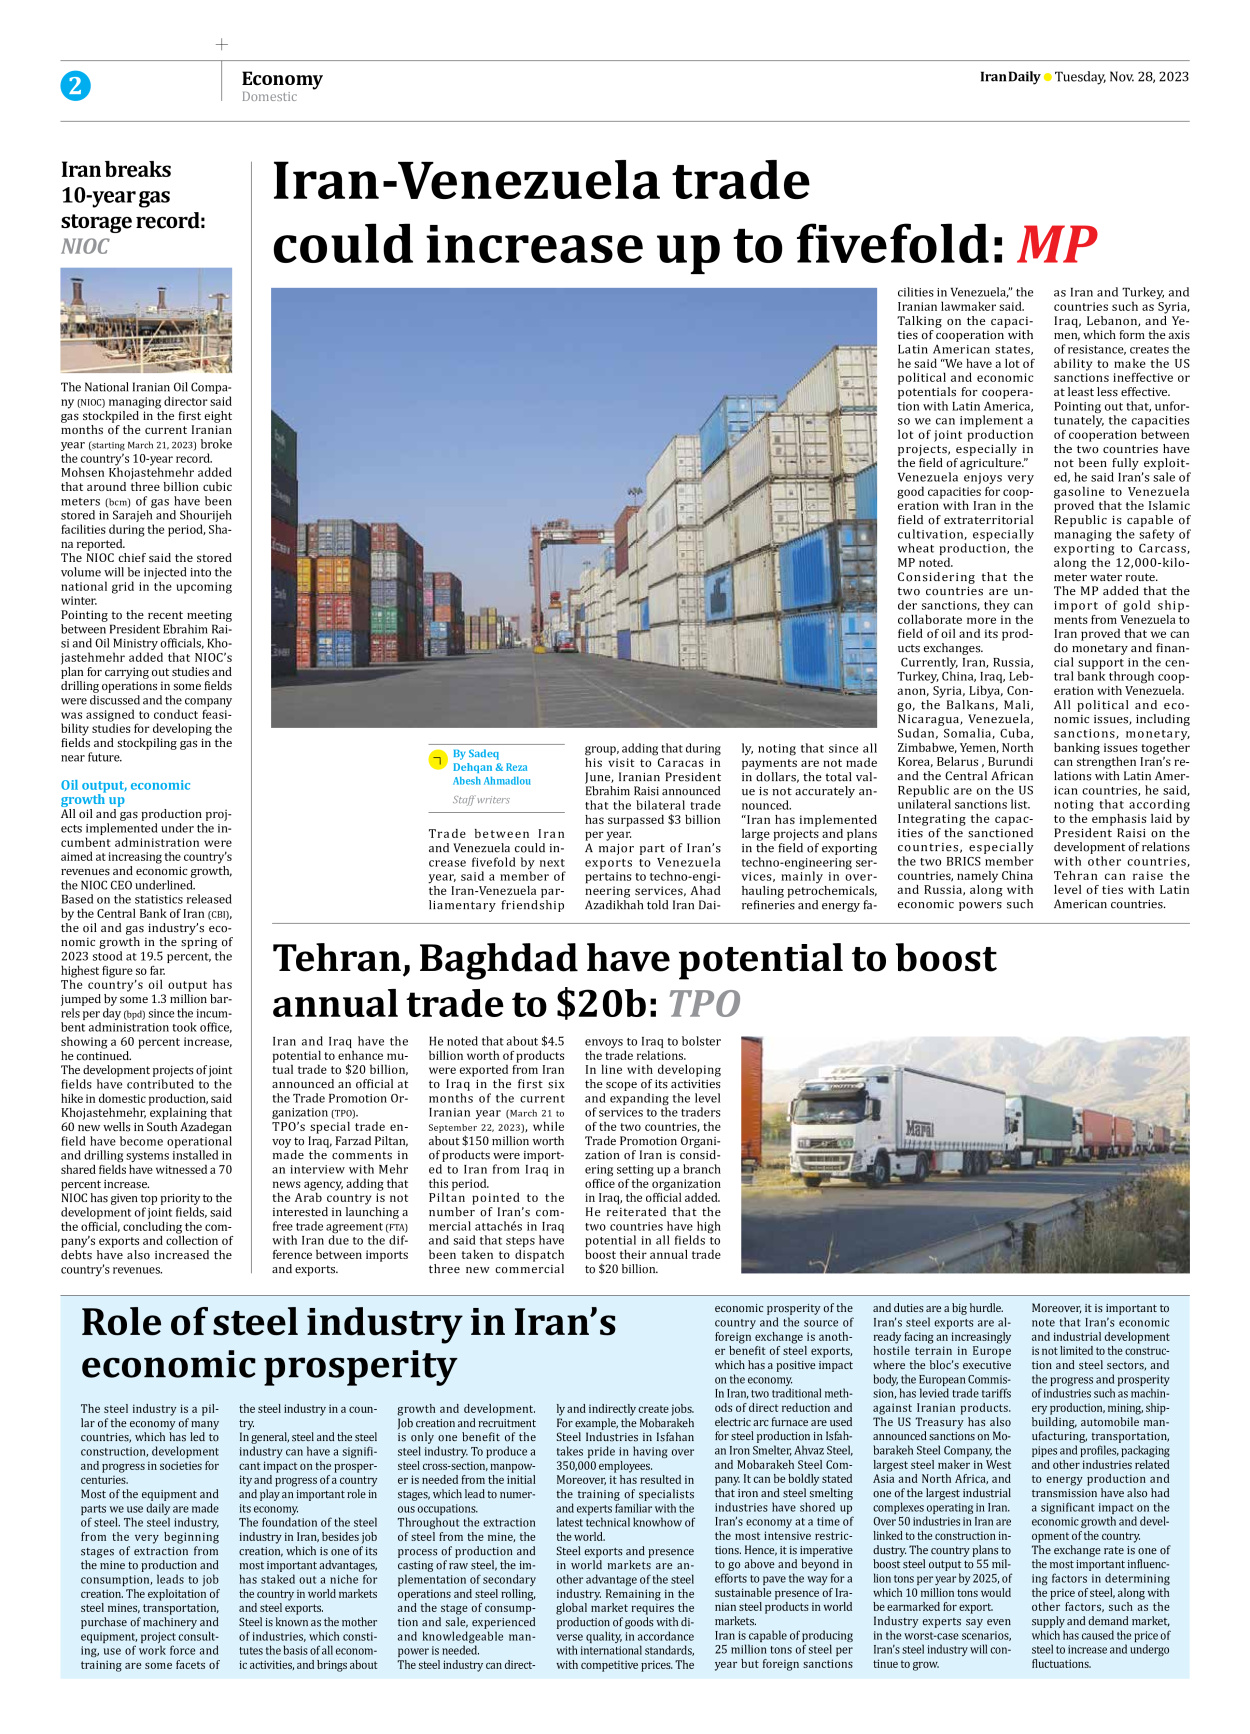 Iran Daily - Number Seven Thousand Four Hundred and Forty Six - 28 November 2023 - Page 2